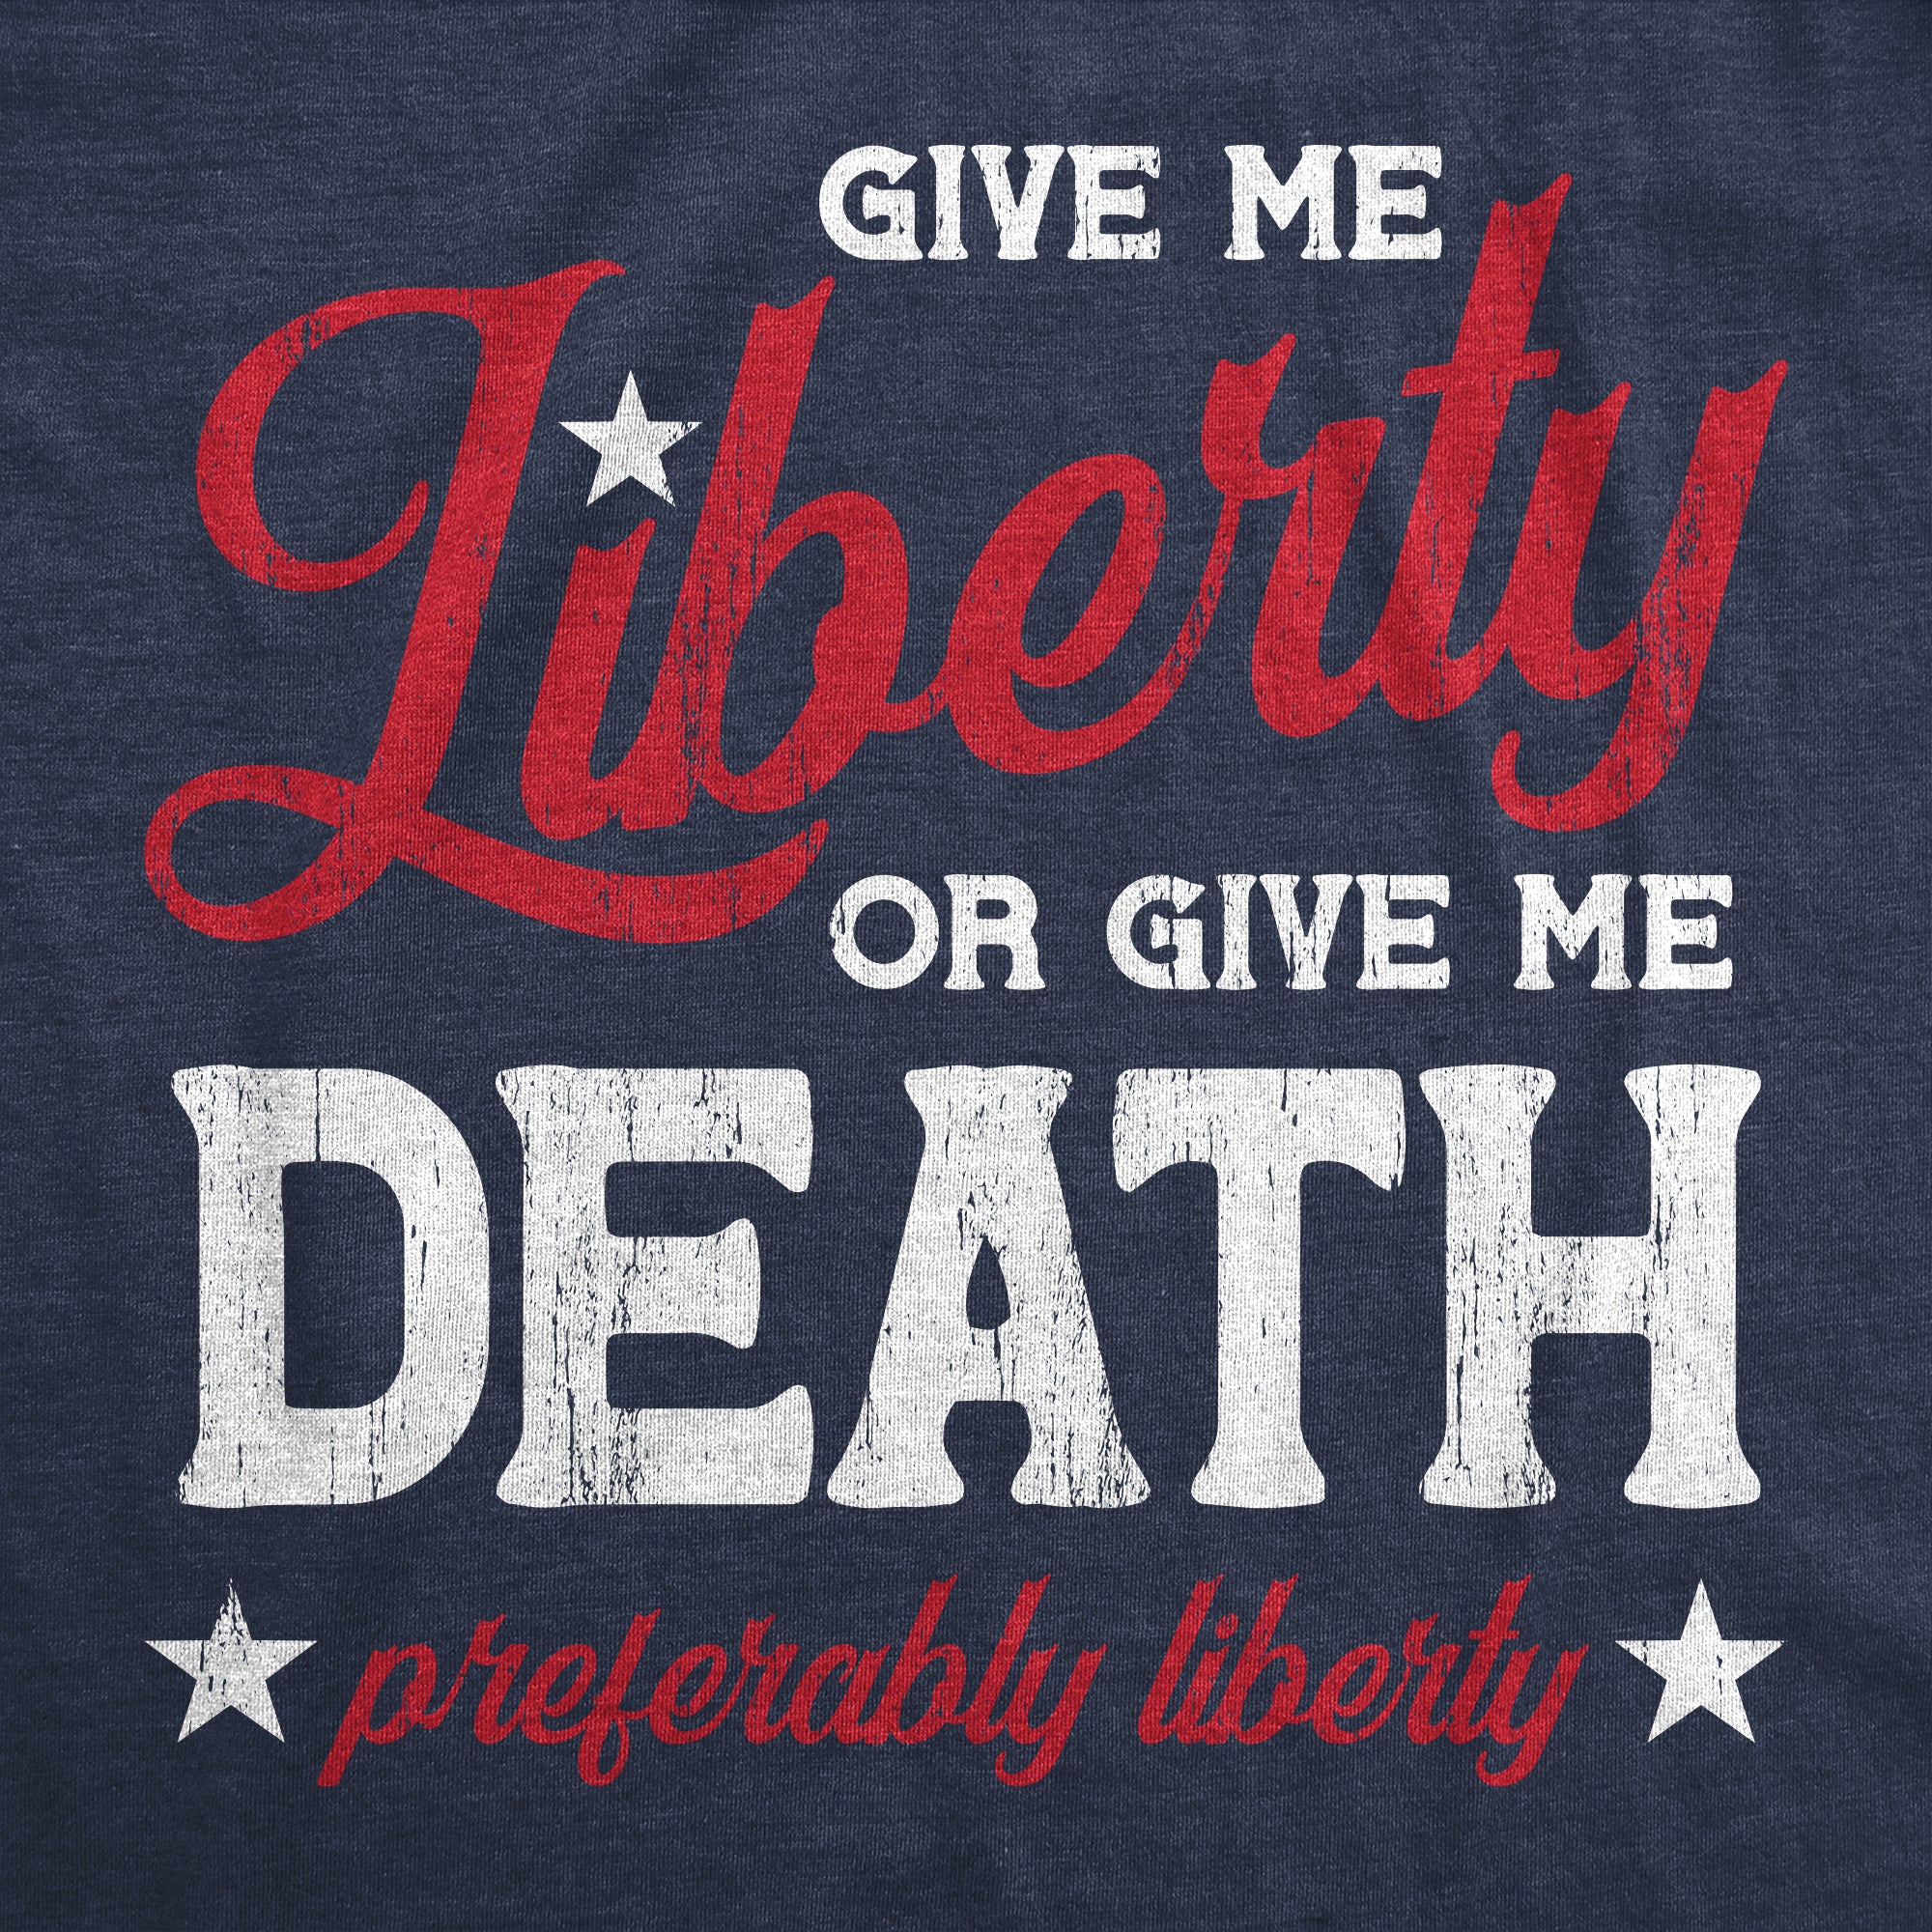 Funny Heather Navy Give Me Liberty Or Give Me Death Mens T Shirt Nerdy Fourth of July Political Tee